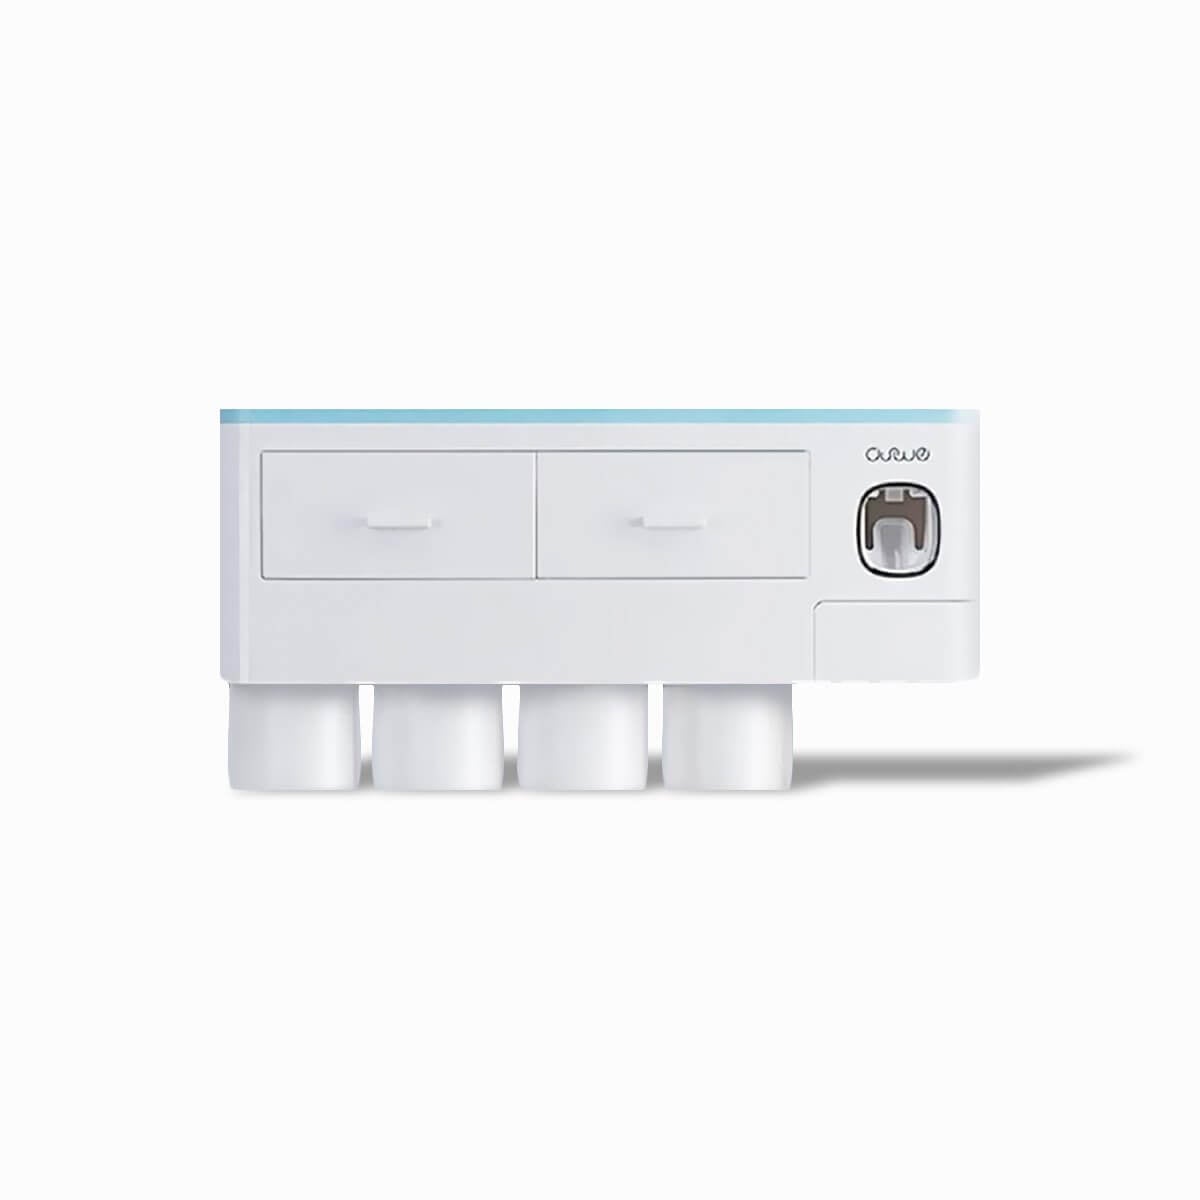 Simply Comfy | Automatic Toothpaste Dispenser